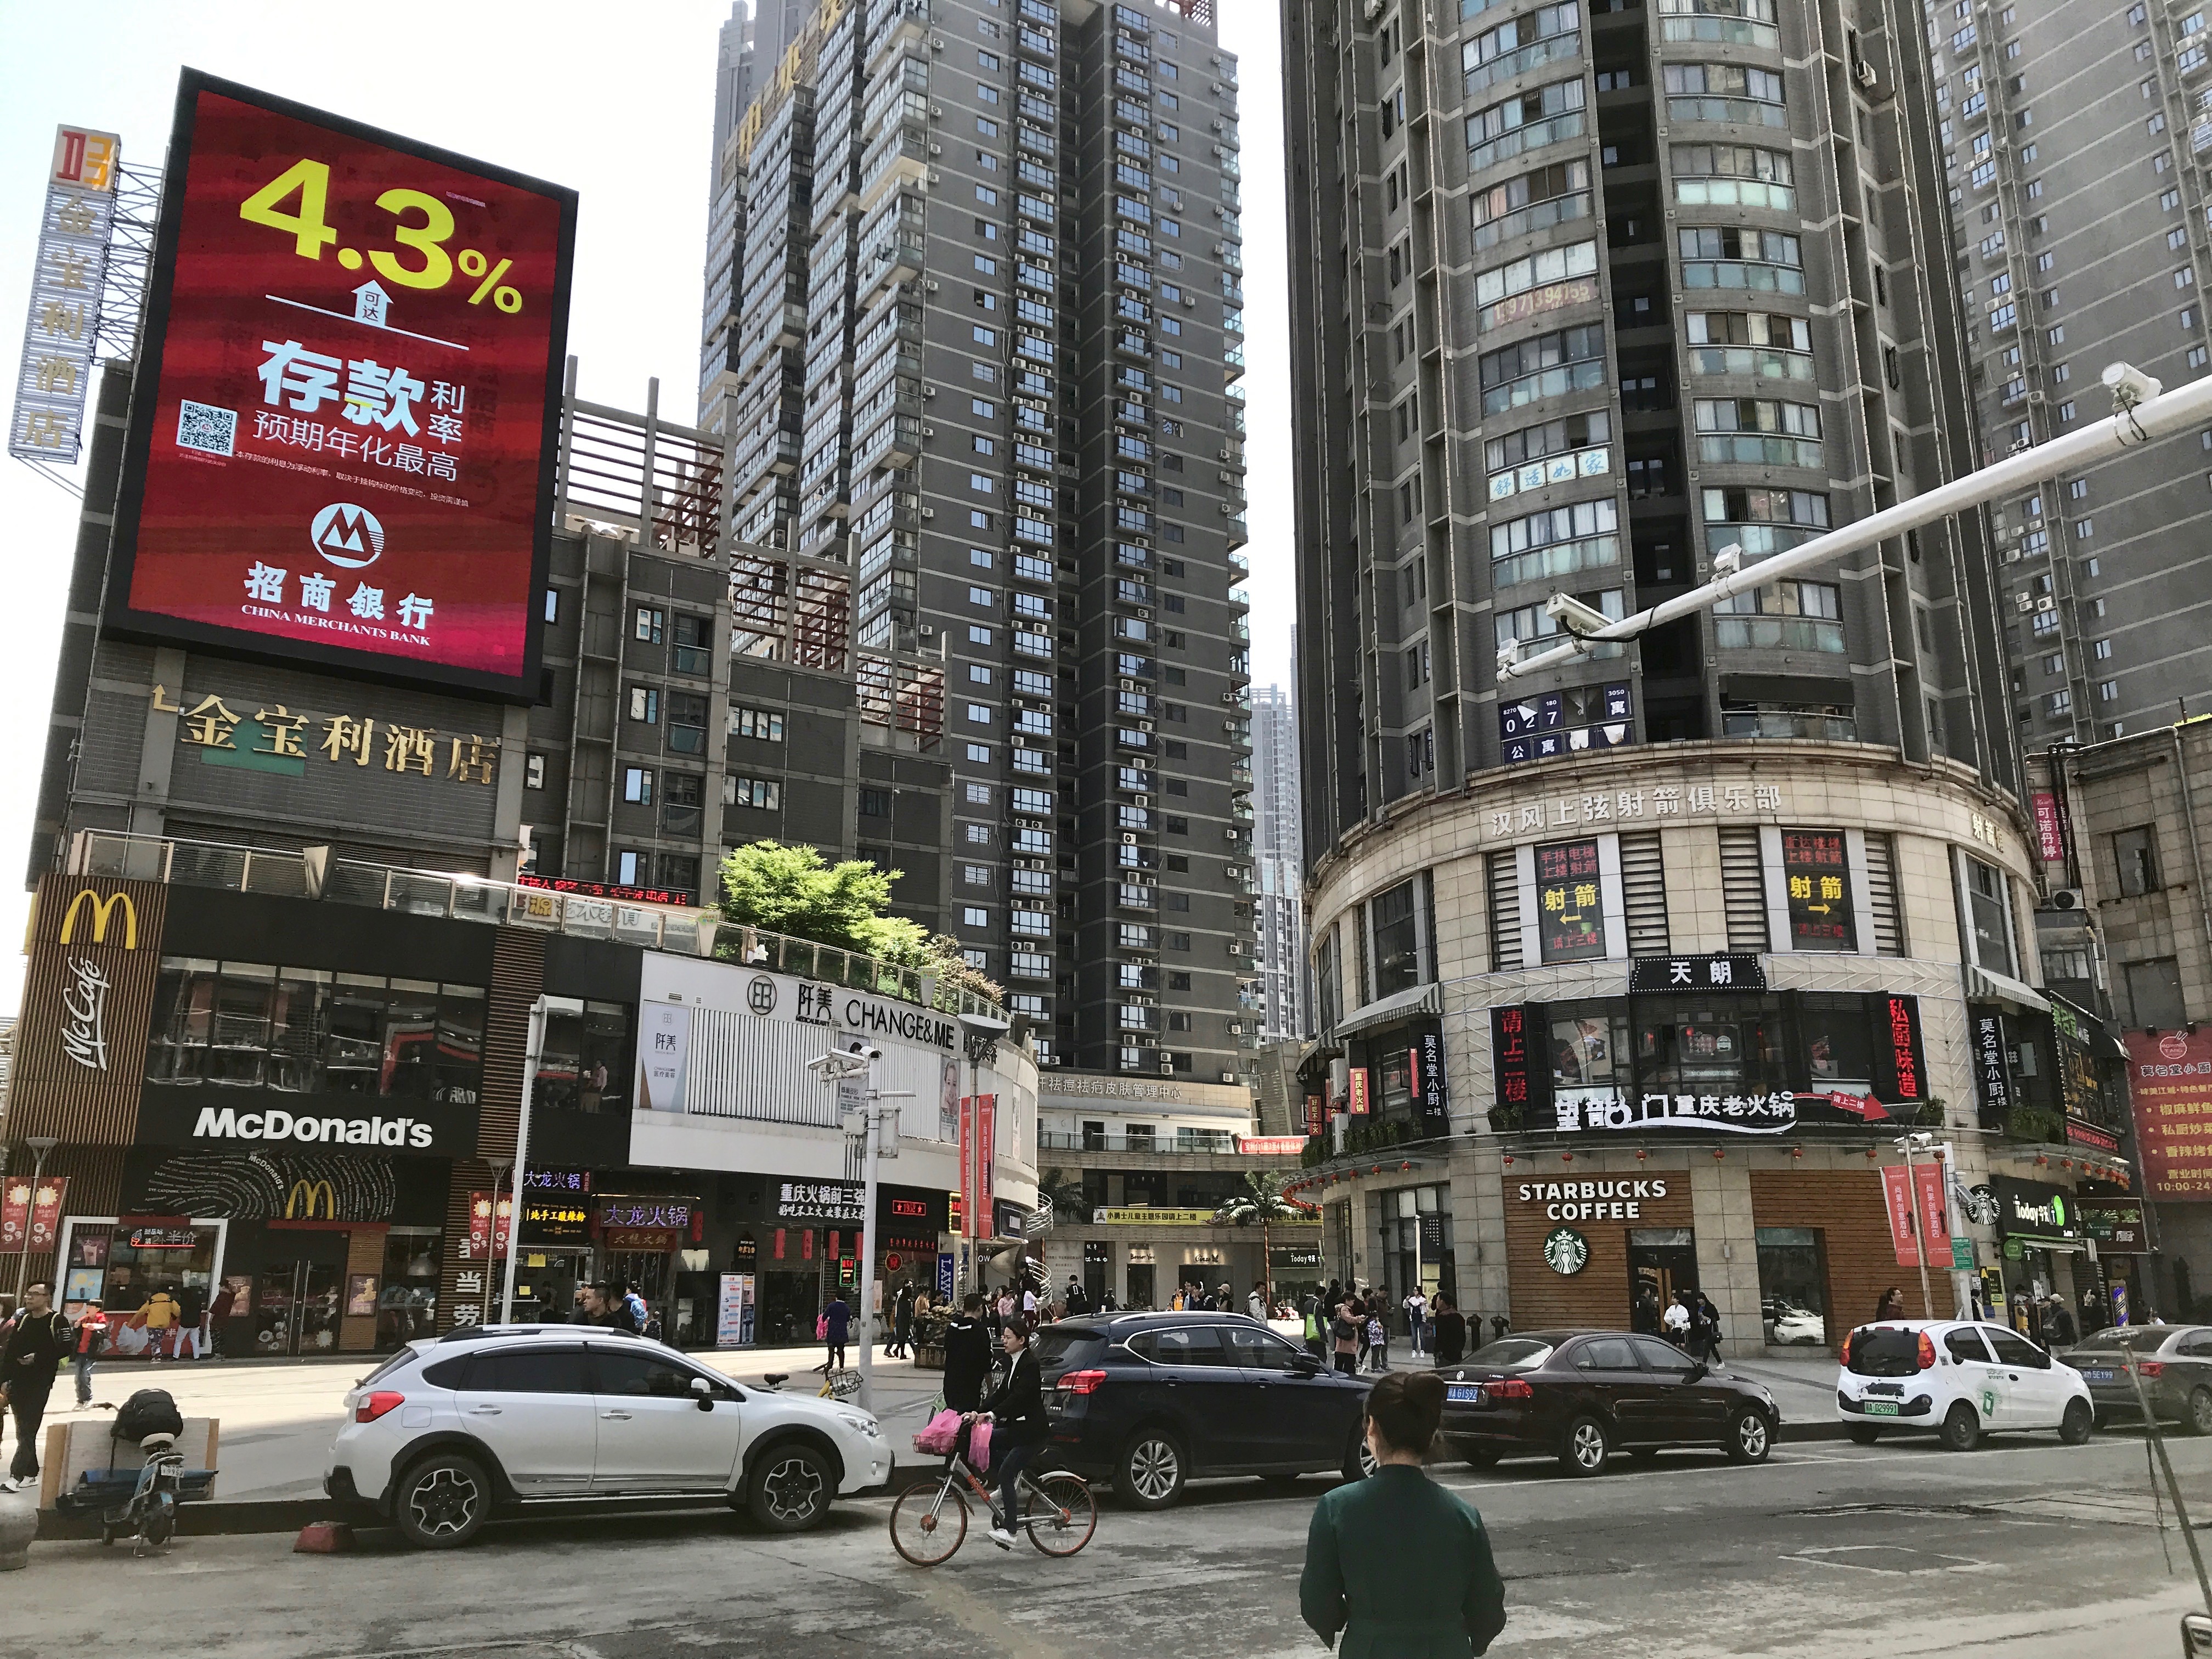 New apartments and shops near Zhongshan Avenue, featuring global chains like McDonald’s and Starbucks (Photo: Carl Hooks)